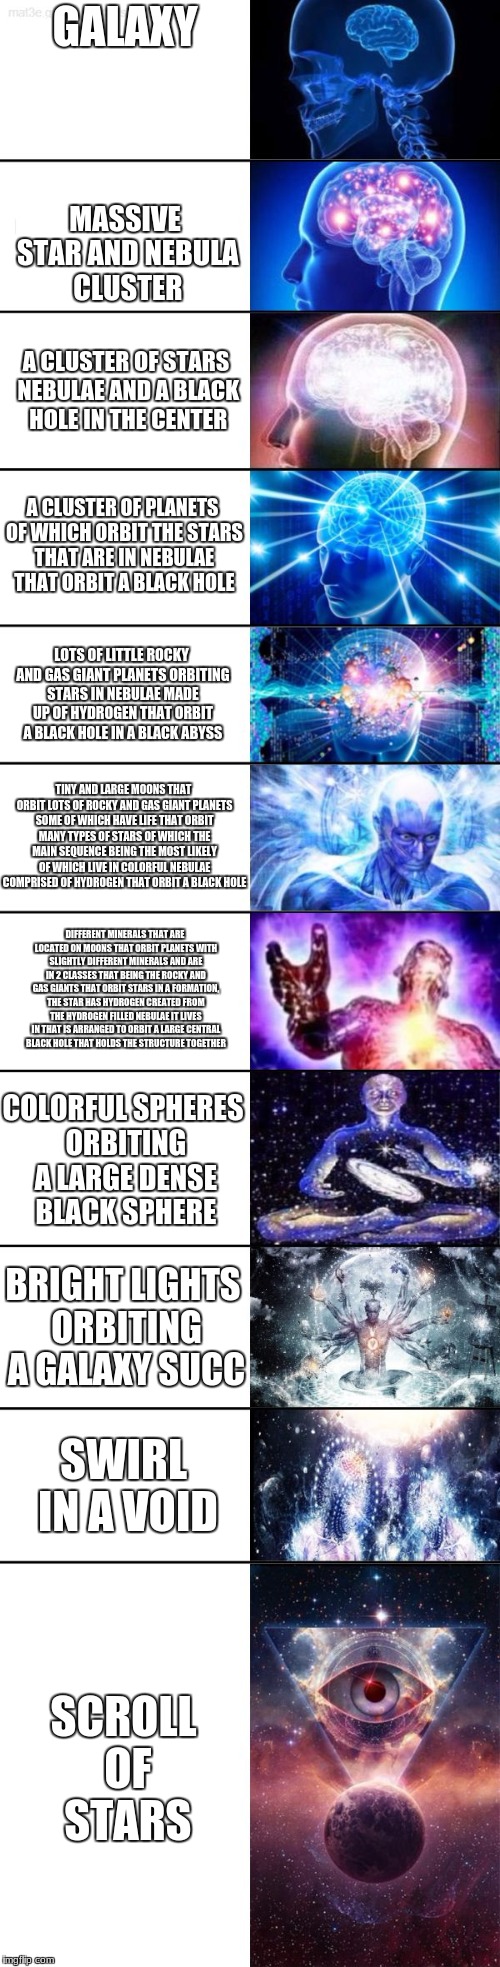 Extended Expanding Brain | GALAXY; MASSIVE STAR AND NEBULA CLUSTER; A CLUSTER OF STARS NEBULAE AND A BLACK HOLE IN THE CENTER; A CLUSTER OF PLANETS OF WHICH ORBIT THE STARS THAT ARE IN NEBULAE THAT ORBIT A BLACK HOLE; LOTS OF LITTLE ROCKY AND GAS GIANT PLANETS ORBITING STARS IN NEBULAE MADE UP OF HYDROGEN THAT ORBIT A BLACK HOLE IN A BLACK ABYSS; TINY AND LARGE MOONS THAT ORBIT LOTS OF ROCKY AND GAS GIANT PLANETS SOME OF WHICH HAVE LIFE THAT ORBIT MANY TYPES OF STARS OF WHICH THE MAIN SEQUENCE BEING THE MOST LIKELY OF WHICH LIVE IN COLORFUL NEBULAE COMPRISED OF HYDROGEN THAT ORBIT A BLACK HOLE; DIFFERENT MINERALS THAT ARE LOCATED ON MOONS THAT ORBIT PLANETS WITH SLIGHTLY DIFFERENT MINERALS AND ARE IN 2 CLASSES THAT BEING THE ROCKY AND GAS GIANTS THAT ORBIT STARS IN A FORMATION, THE STAR HAS HYDROGEN CREATED FROM THE HYDROGEN FILLED NEBULAE IT LIVES IN THAT IS ARRANGED TO ORBIT A LARGE CENTRAL BLACK HOLE THAT HOLDS THE STRUCTURE TOGETHER; COLORFUL SPHERES ORBITING A LARGE DENSE BLACK SPHERE; BRIGHT LIGHTS ORBITING A GALAXY SUCC; SWIRL IN A VOID; SCROLL OF STARS | image tagged in extended expanding brain | made w/ Imgflip meme maker